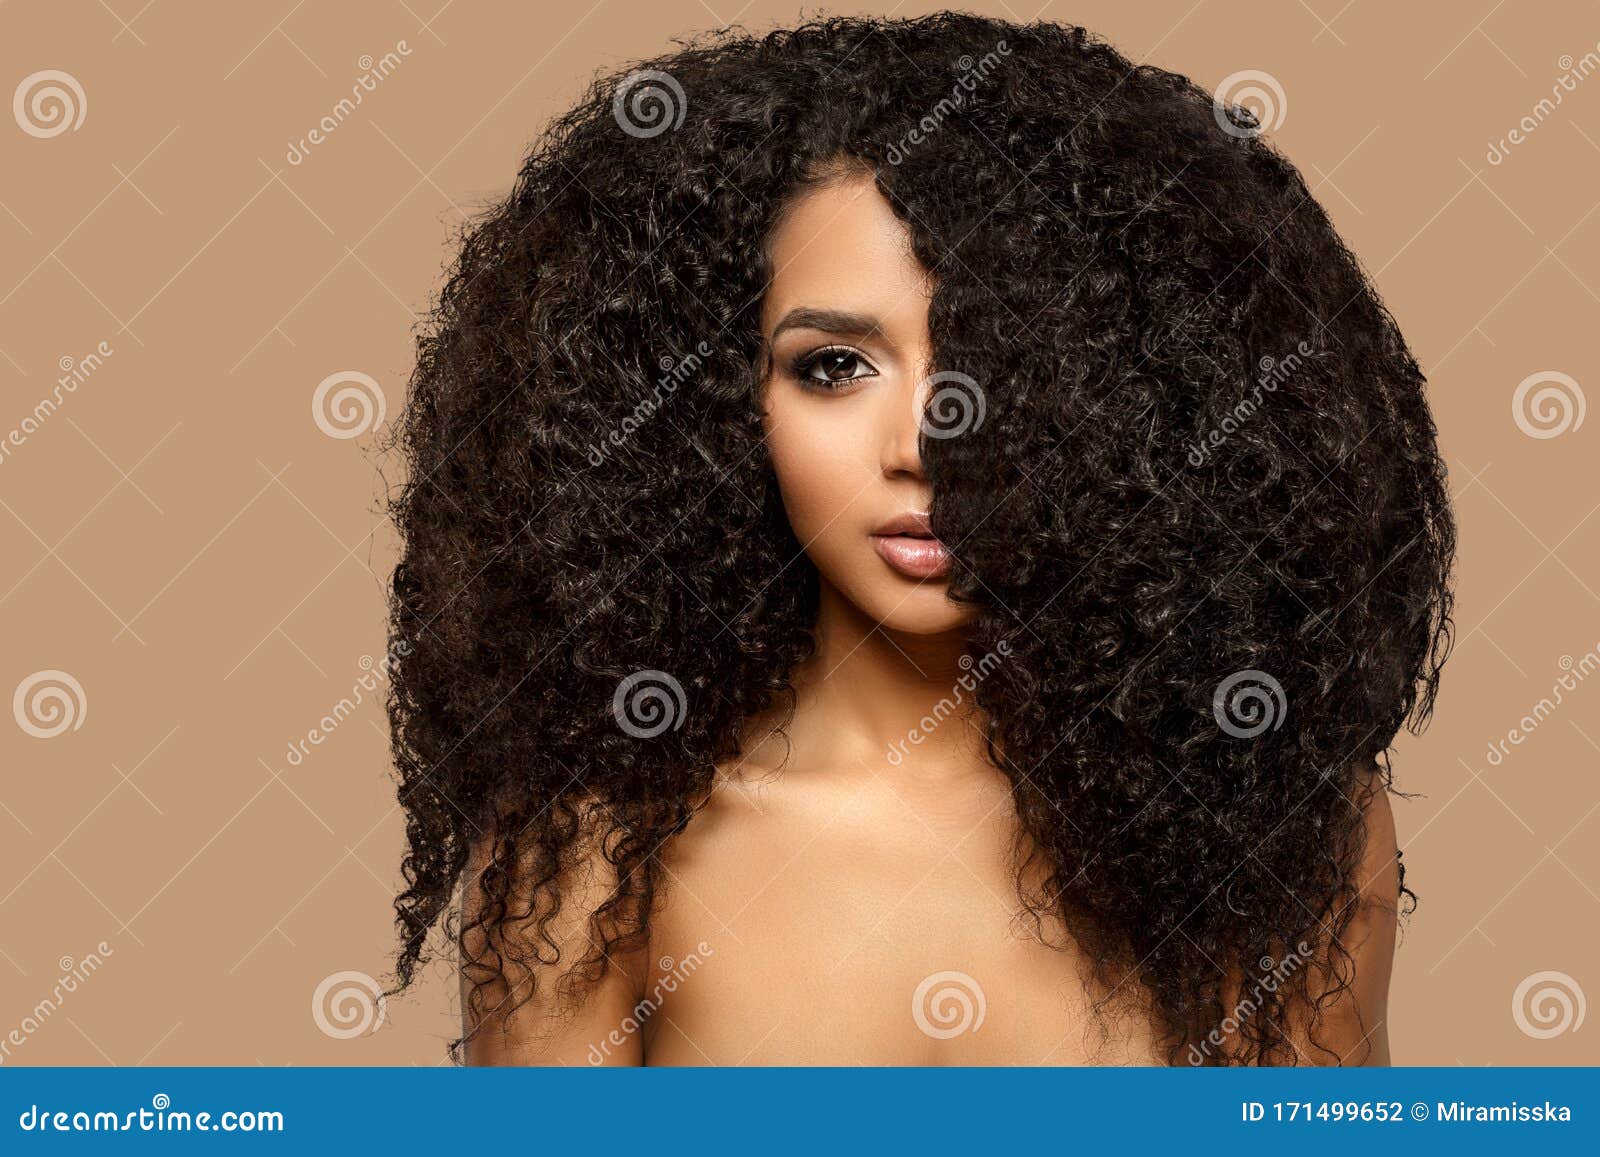 beauty black skin woman african ethnic female face. young african american model with long afro hair. lux model